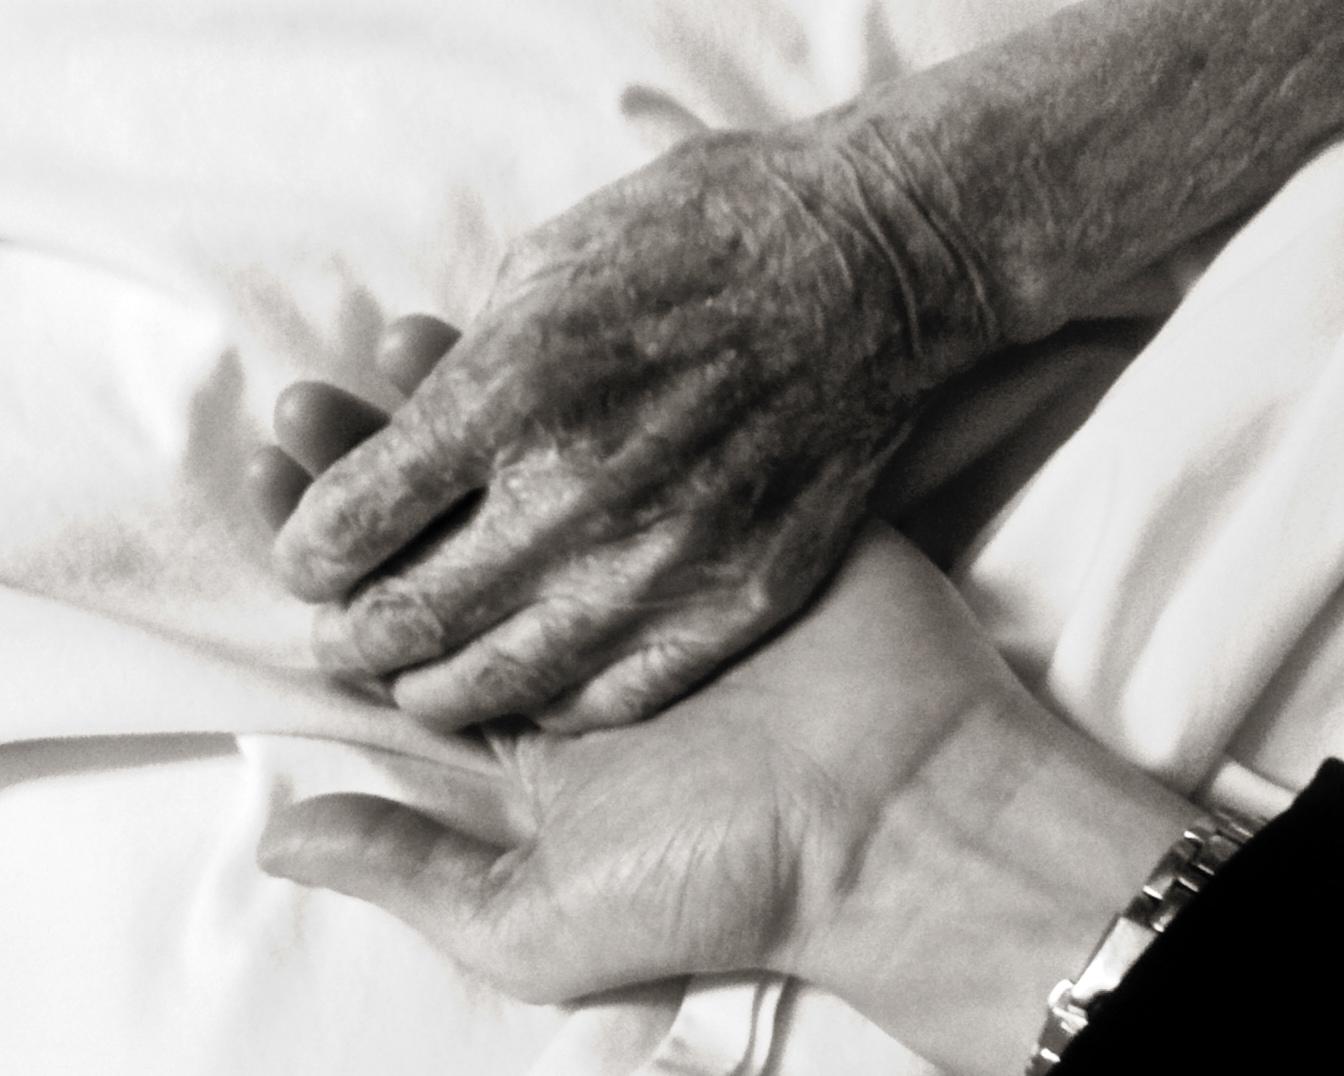 Hospice hands